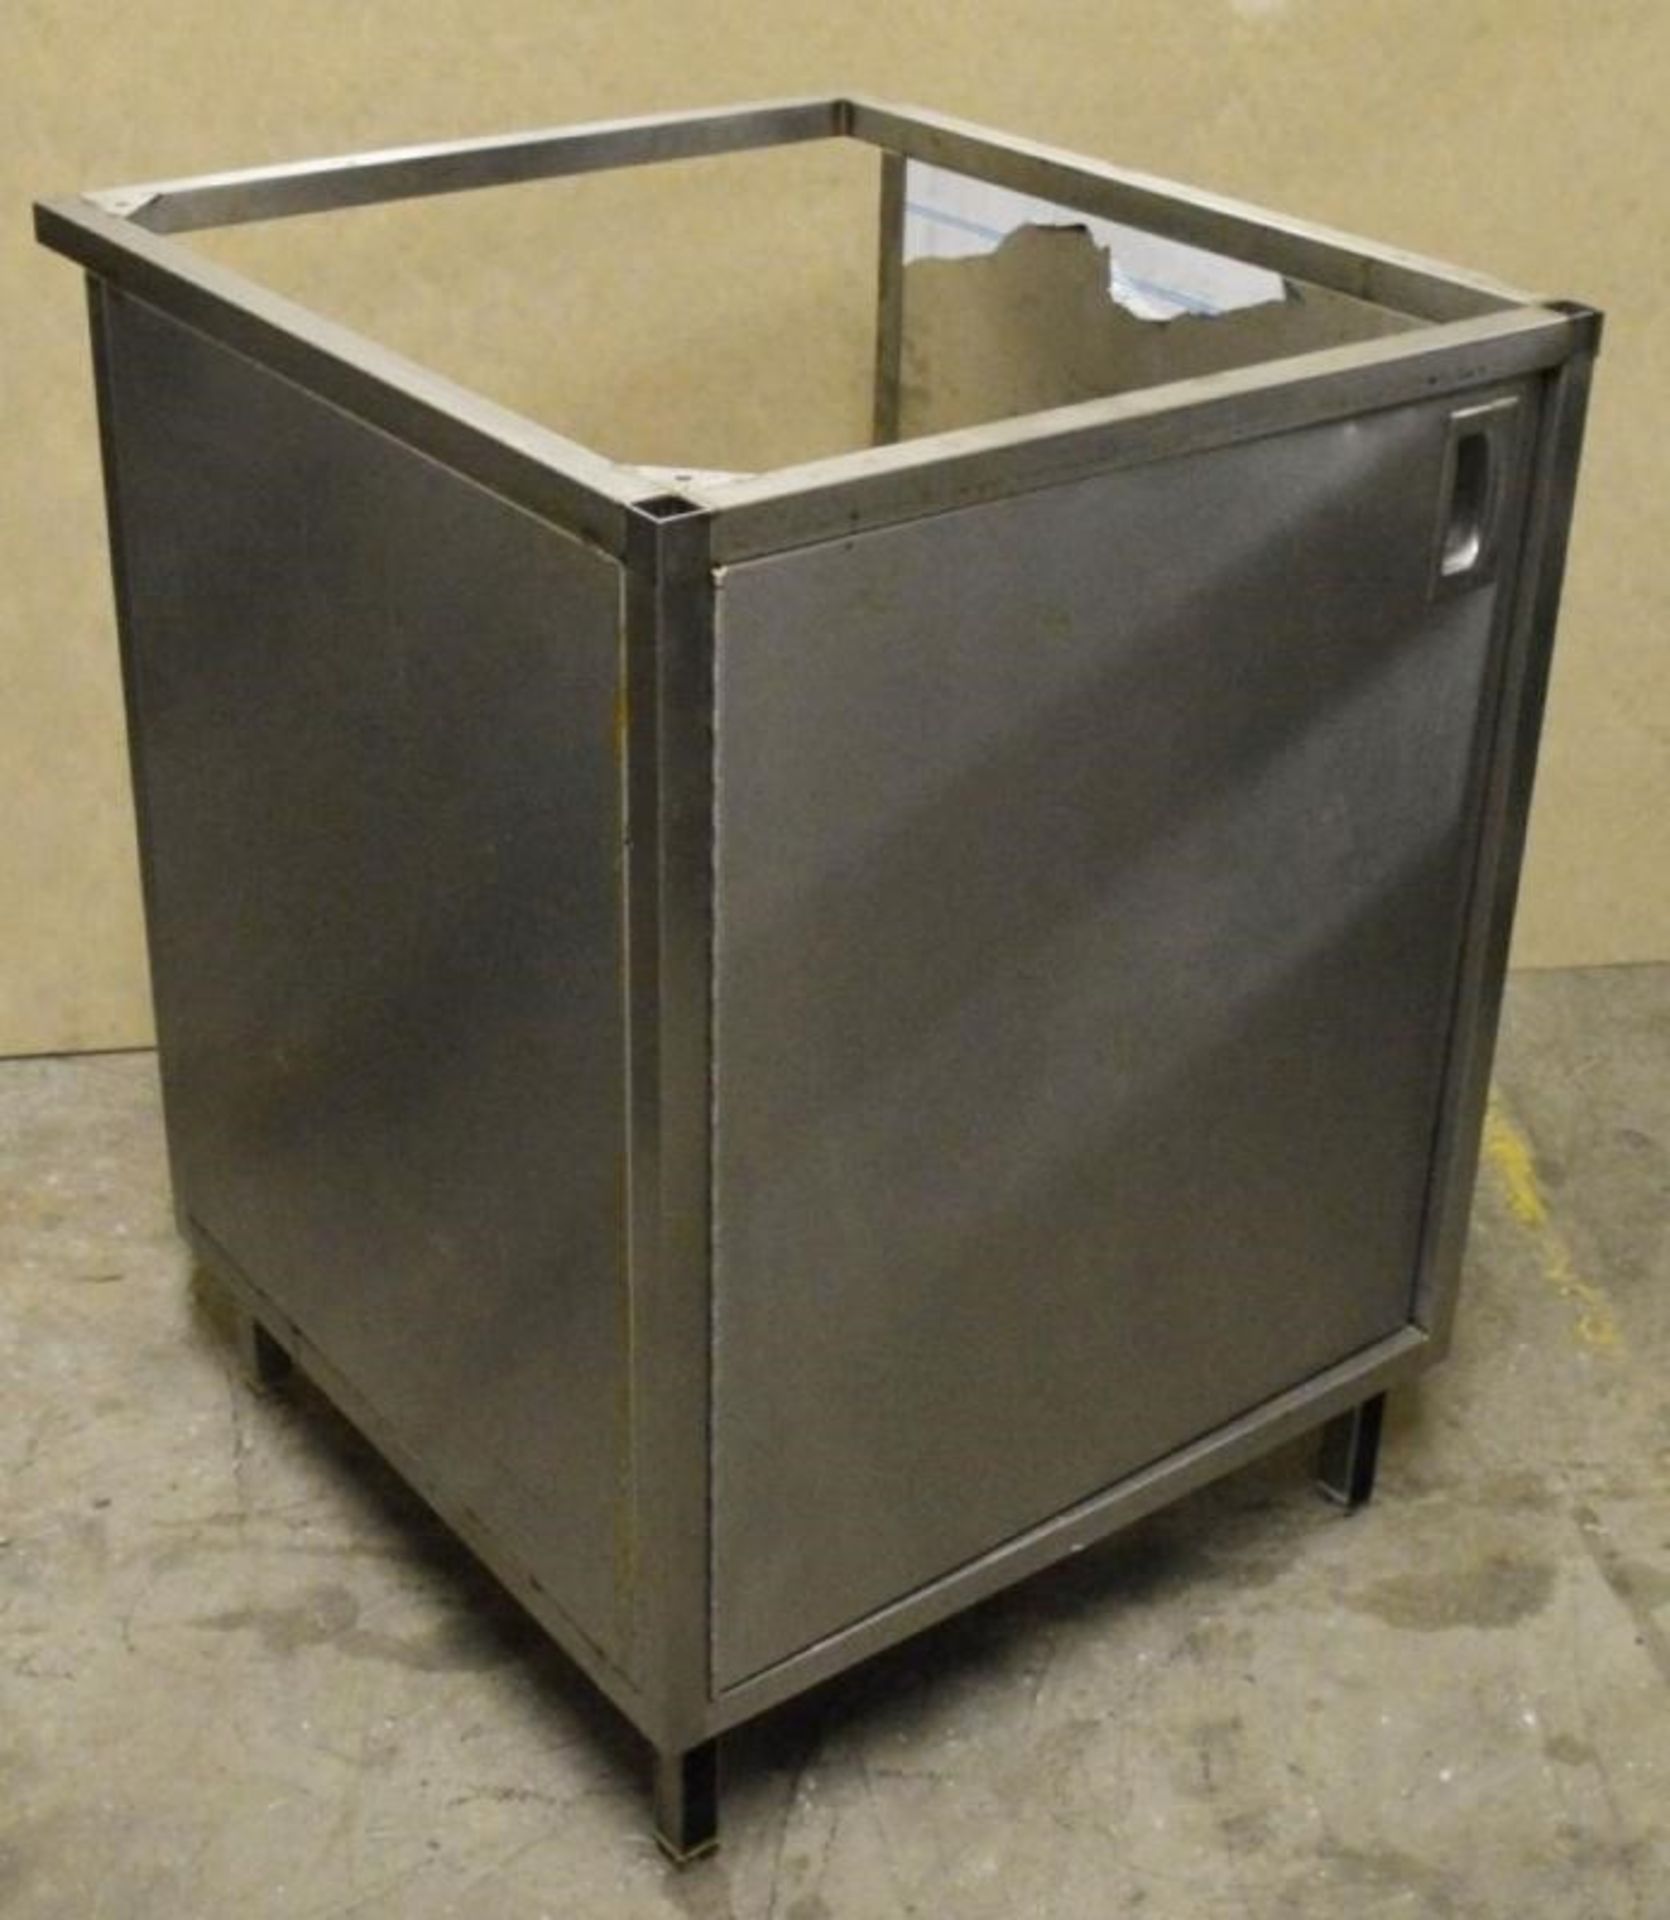 1 x Stainless Steel Single Door Cabinet - H93 x W69 x D76 cms - CL282 - Ref JP335 - Location: Bolton